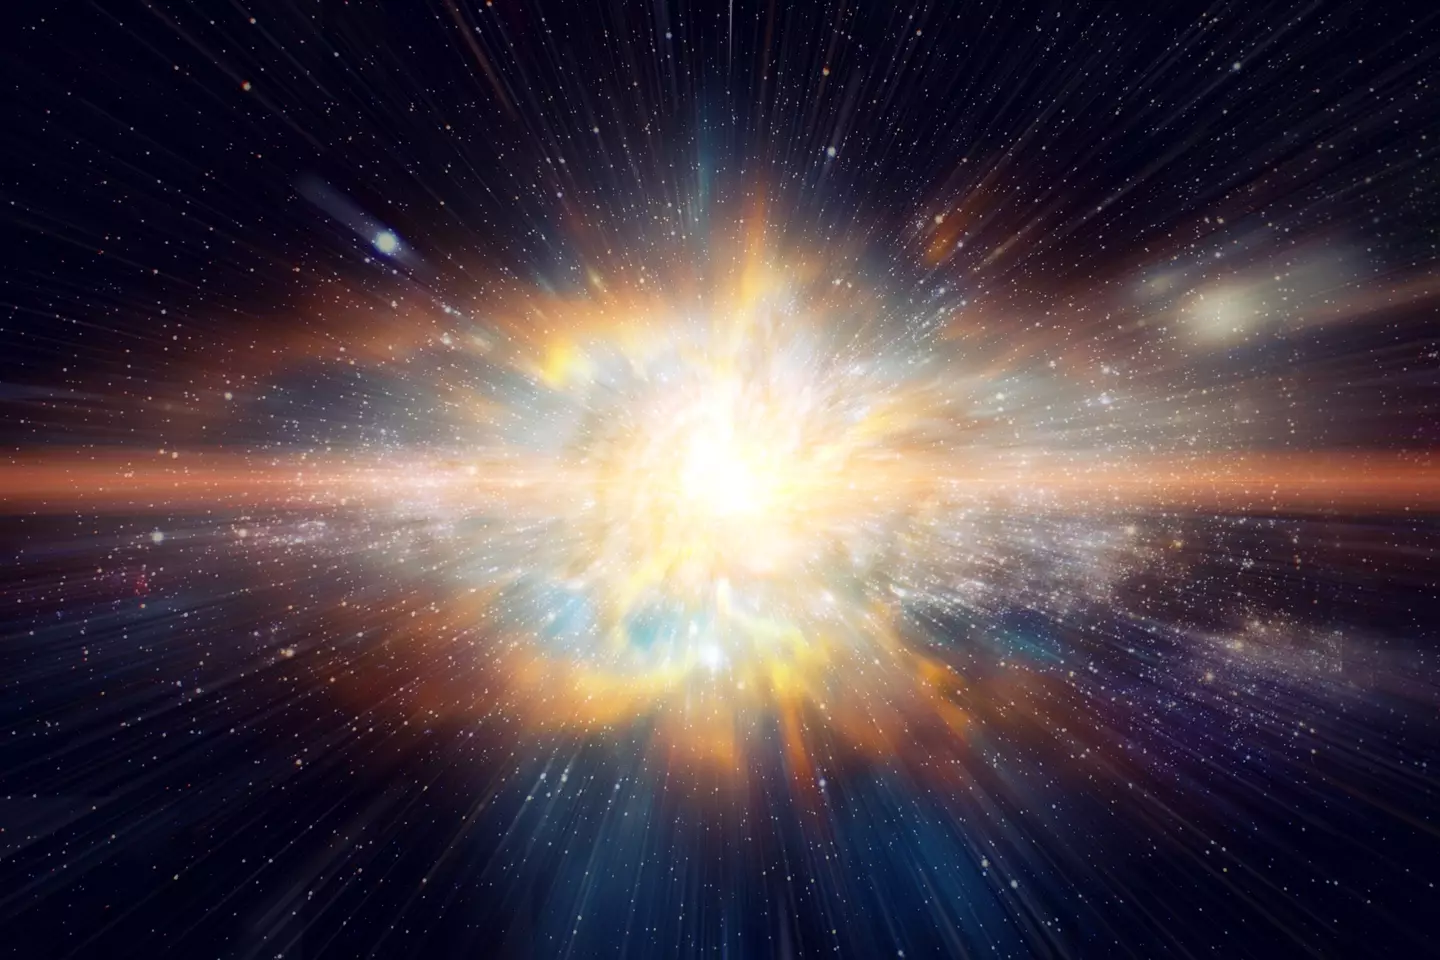 It's thought that massive stars exploding into supernovae could leave black holes in its wake.